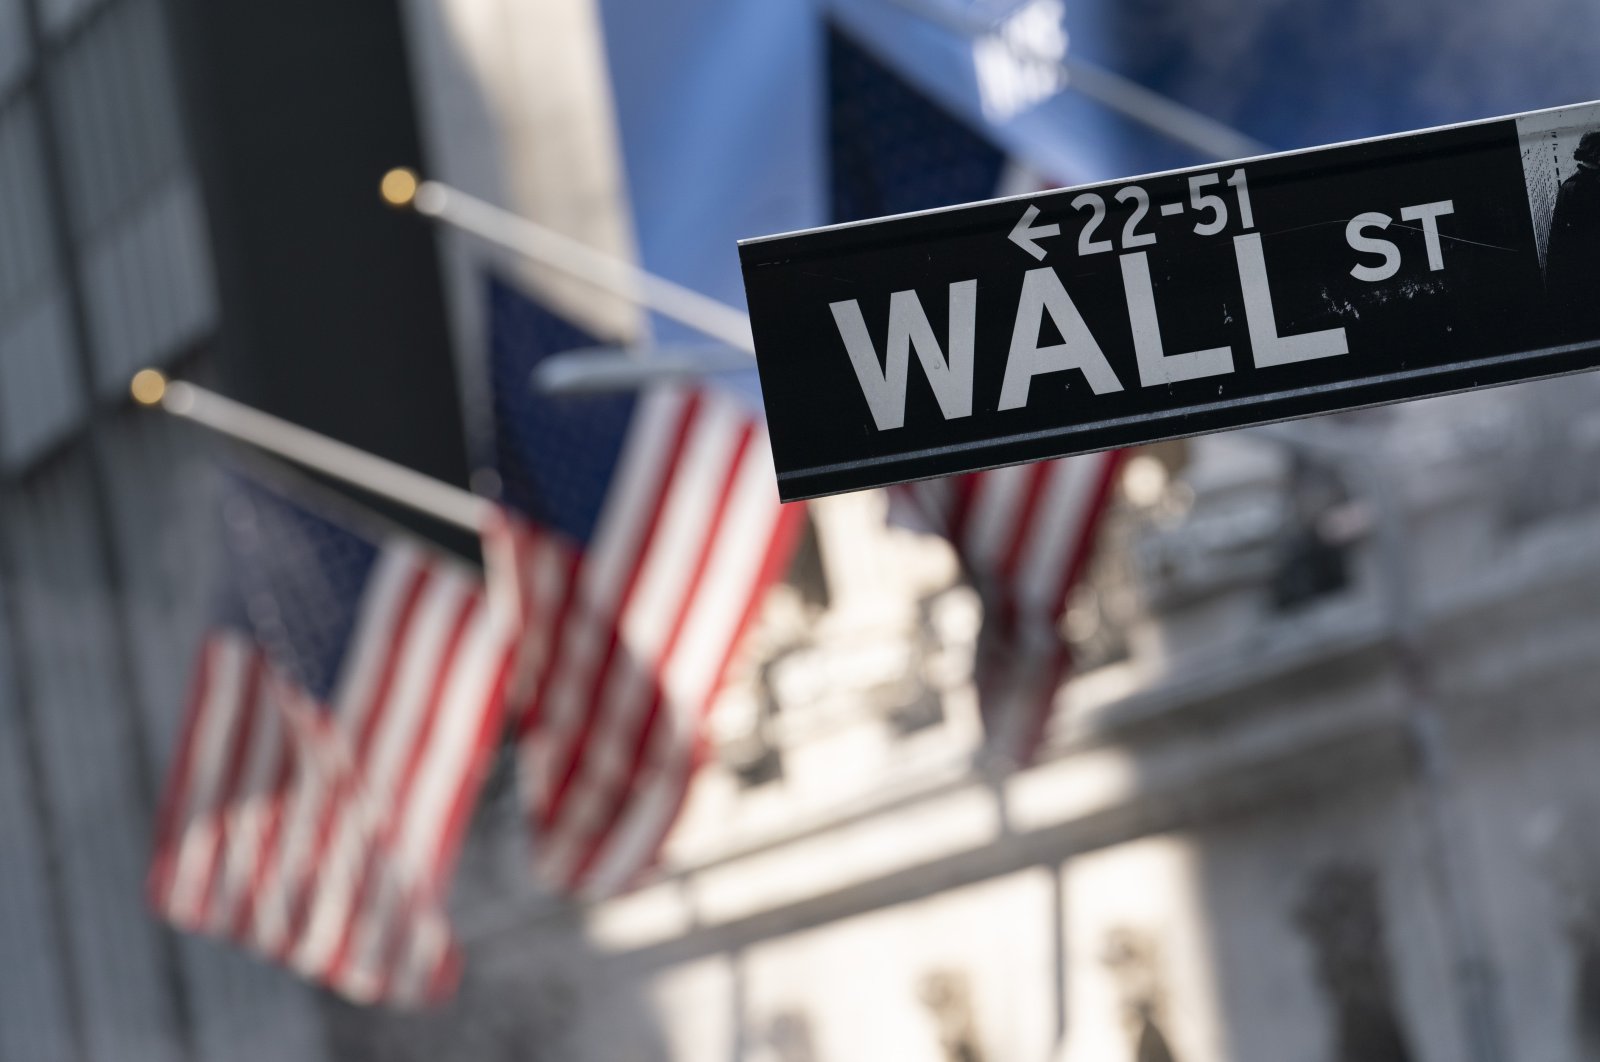 A sign for Wall Street hangs in front of the New York Stock Exchange, July 8, 2021. (AP Photo)